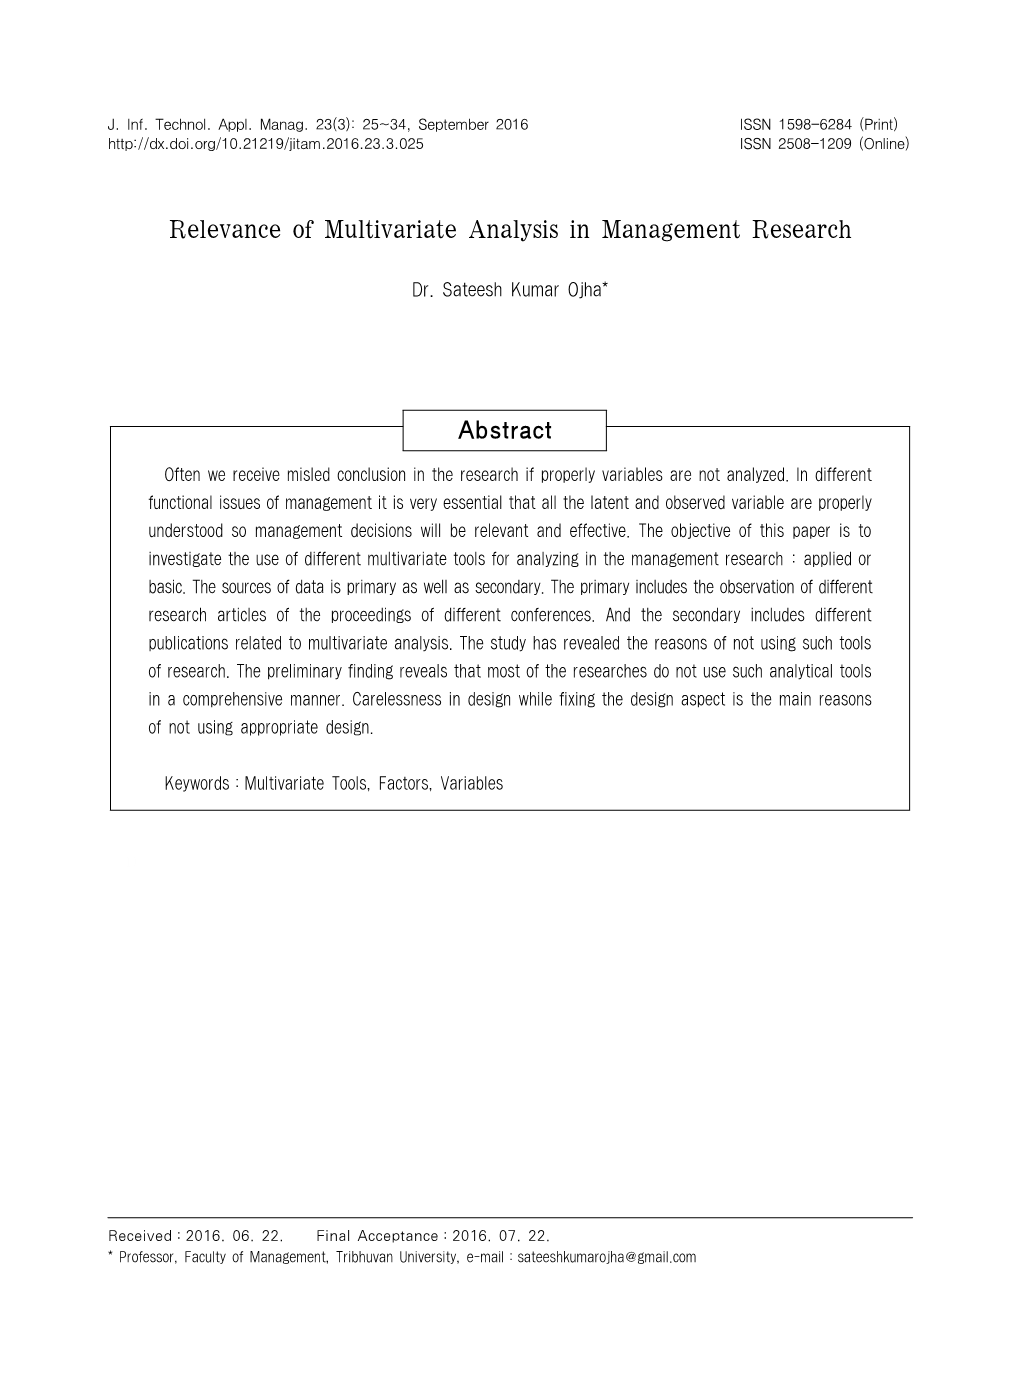 Relevance of Multivariate Analysis in Management Research